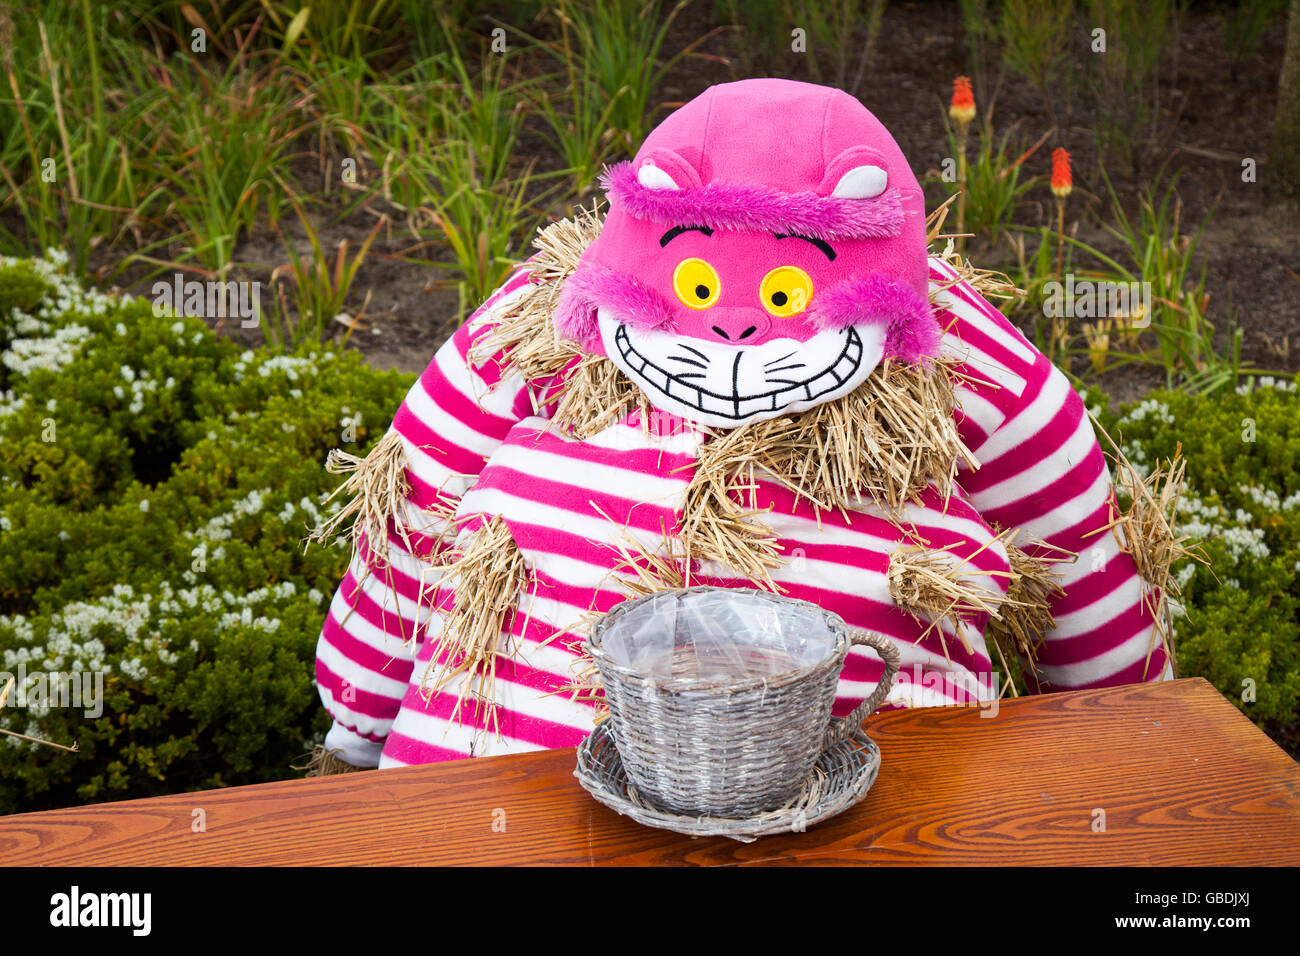 Grinning Cheshire Cat in pink at Mad Hatter's Tea Party, Alice in Wonderland effigy or Scarecrow assembled for the Fleetwood Festival   Tea party with the Mad Hatter,  Alice's Adventures in Wonderland, Lancashire, UK Stock Photo